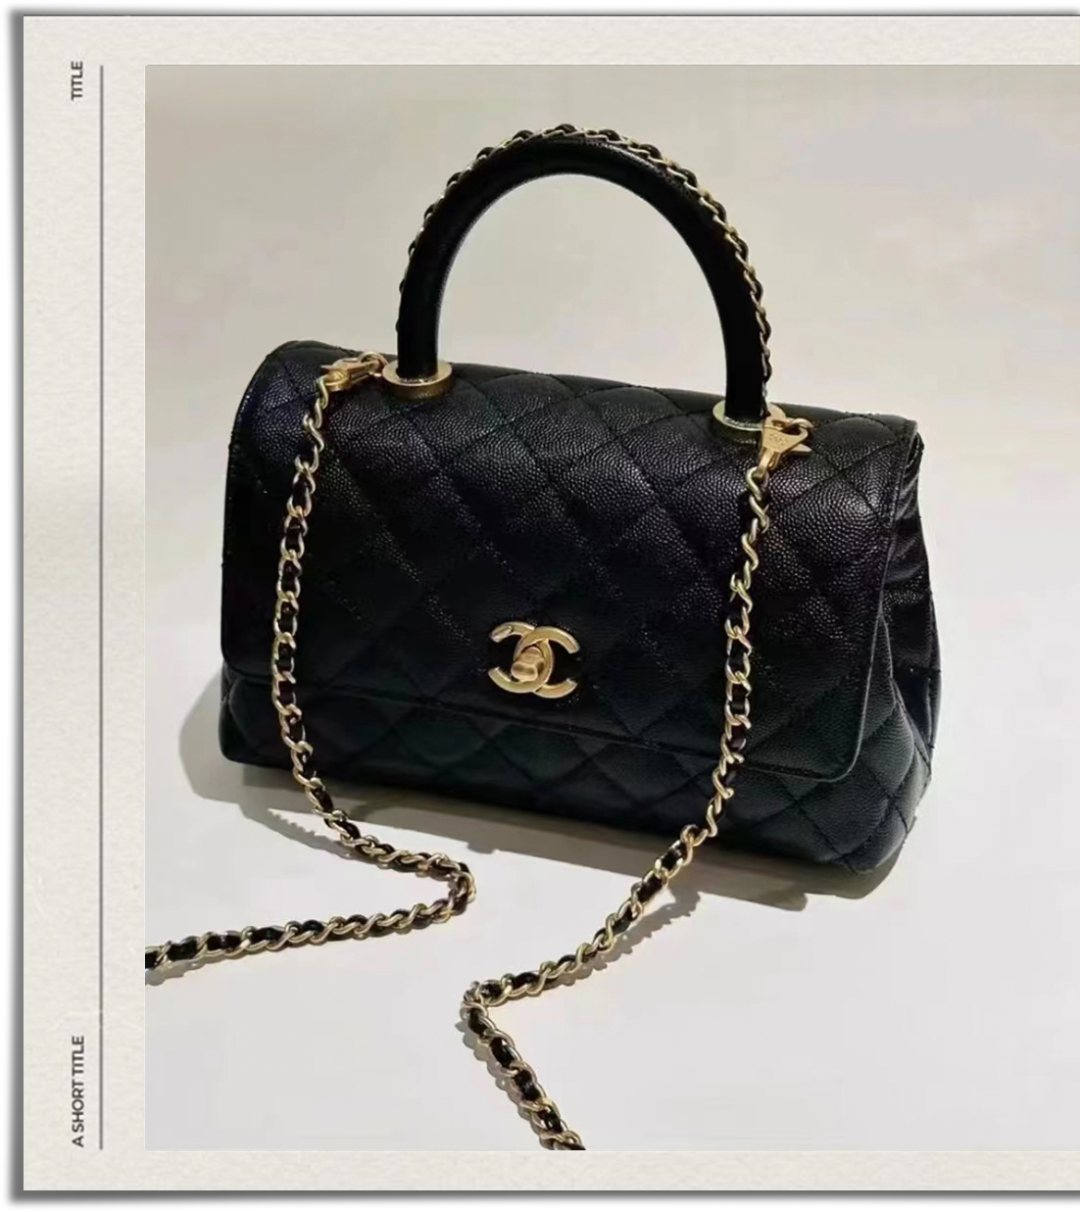 Chanel Gabrielle will not be discontinued, but is no longer a classic model (2023 updated)-Best Quality Fake designer Bag Review, Replica designer bag ru